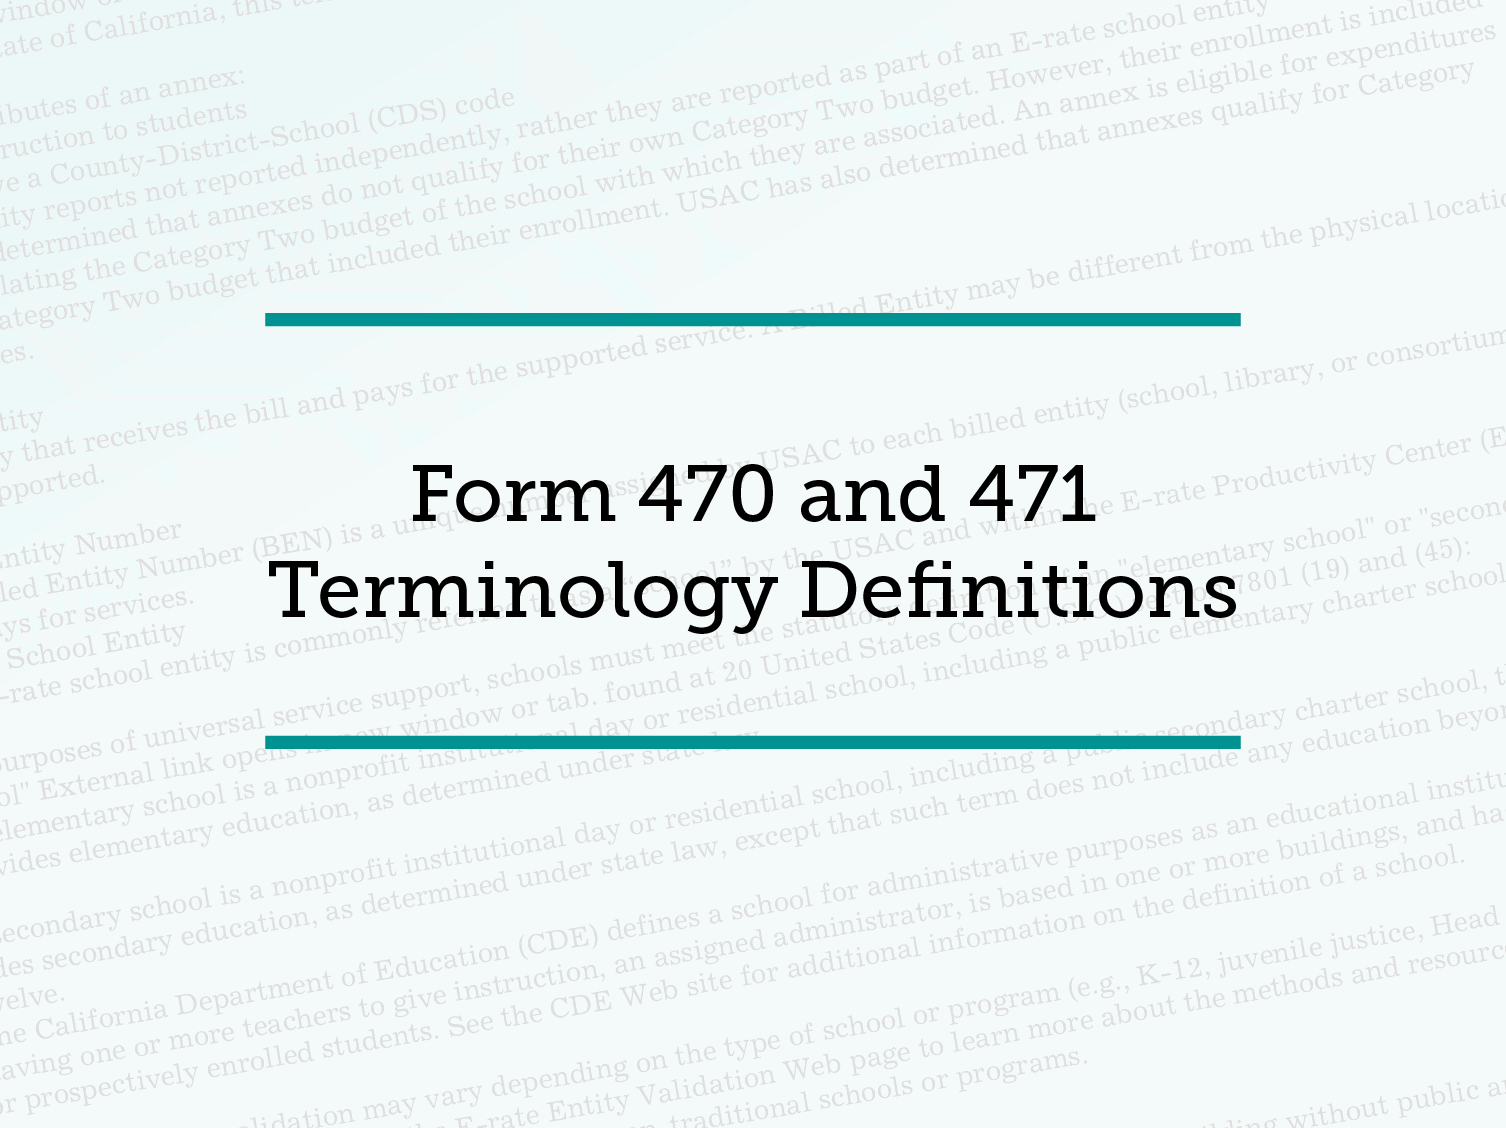 Form 470 and 471 Terminology Definitions